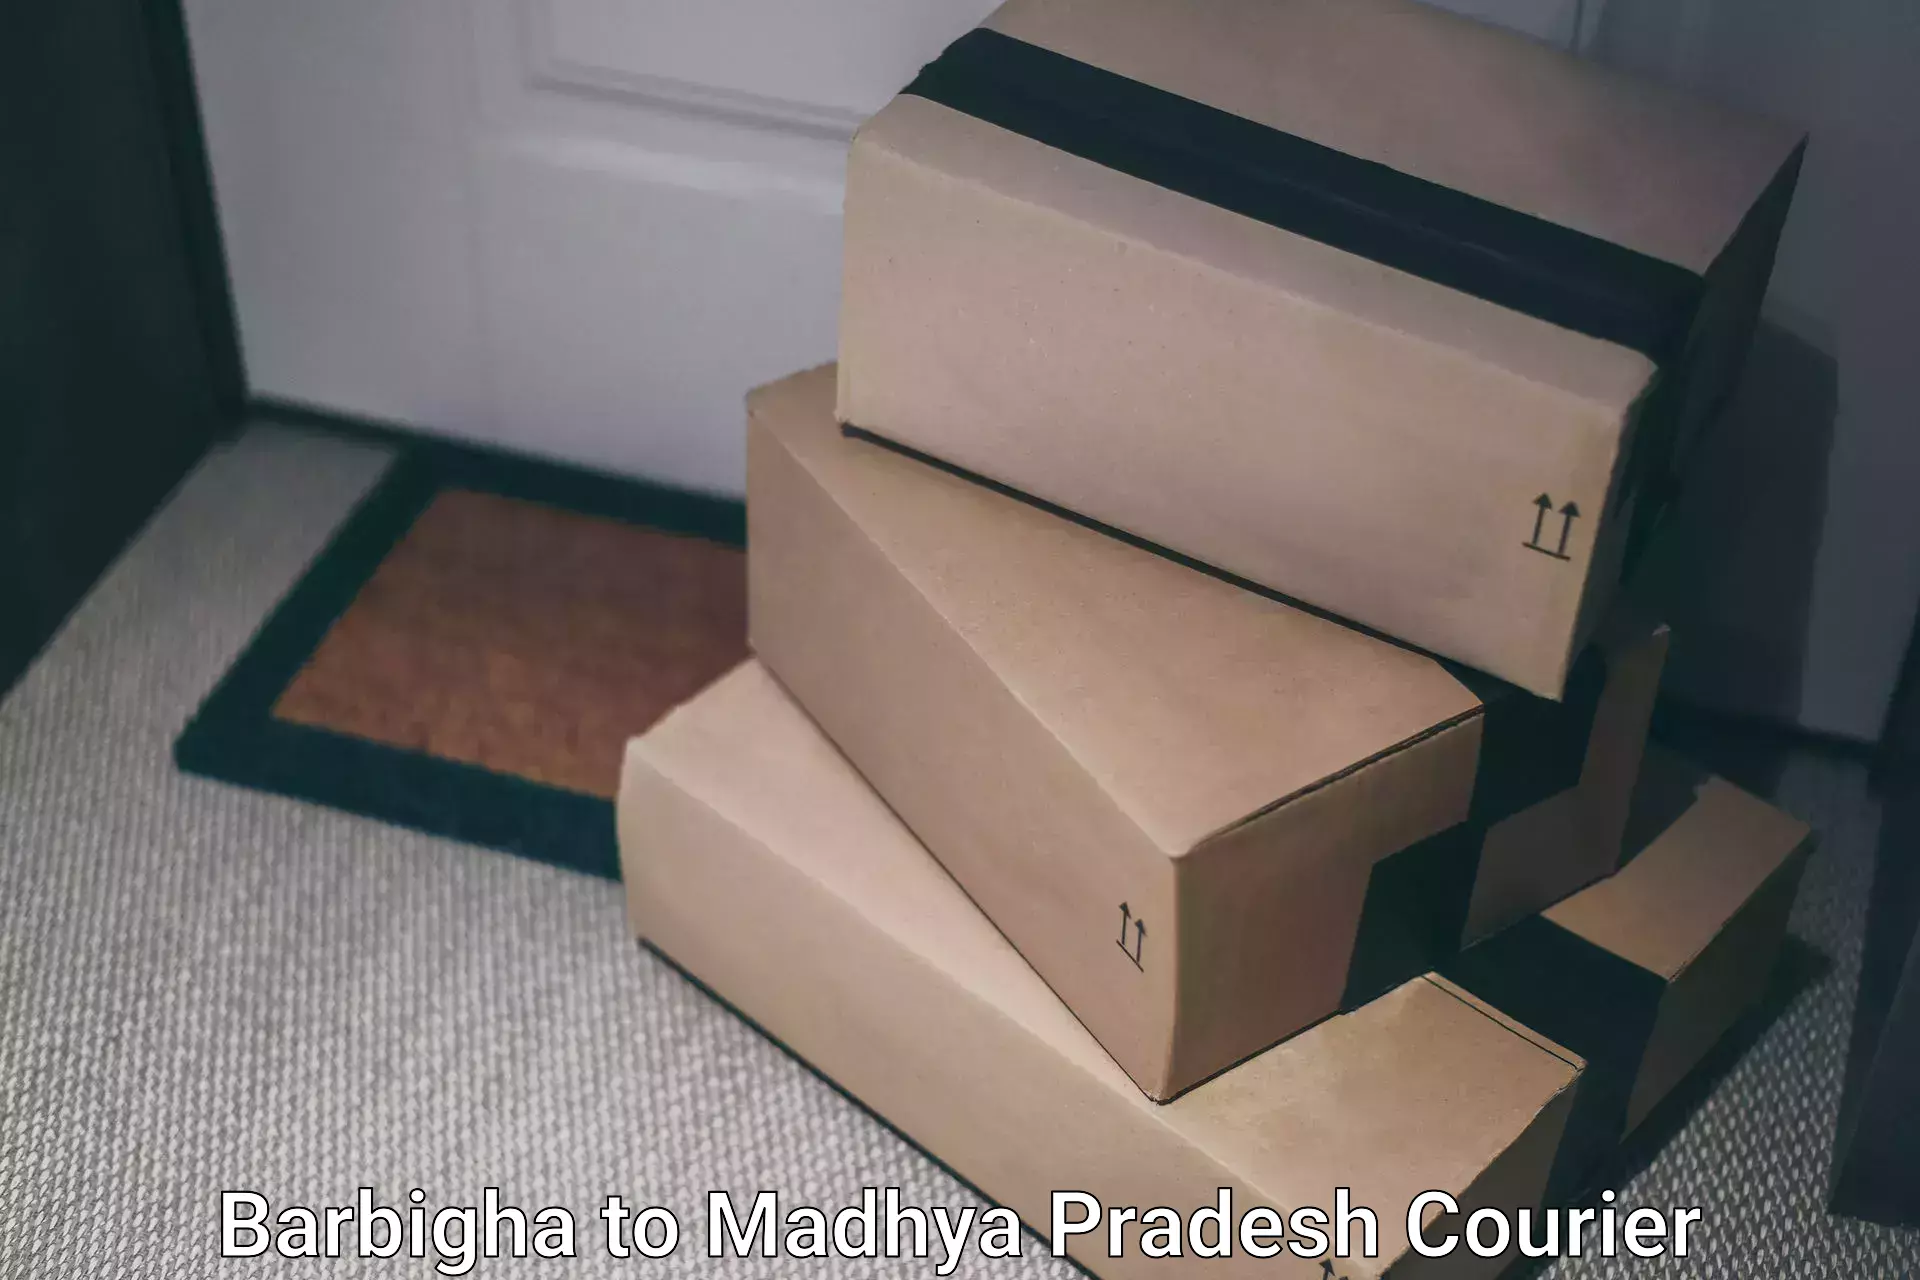 Modern courier technology Barbigha to Indore